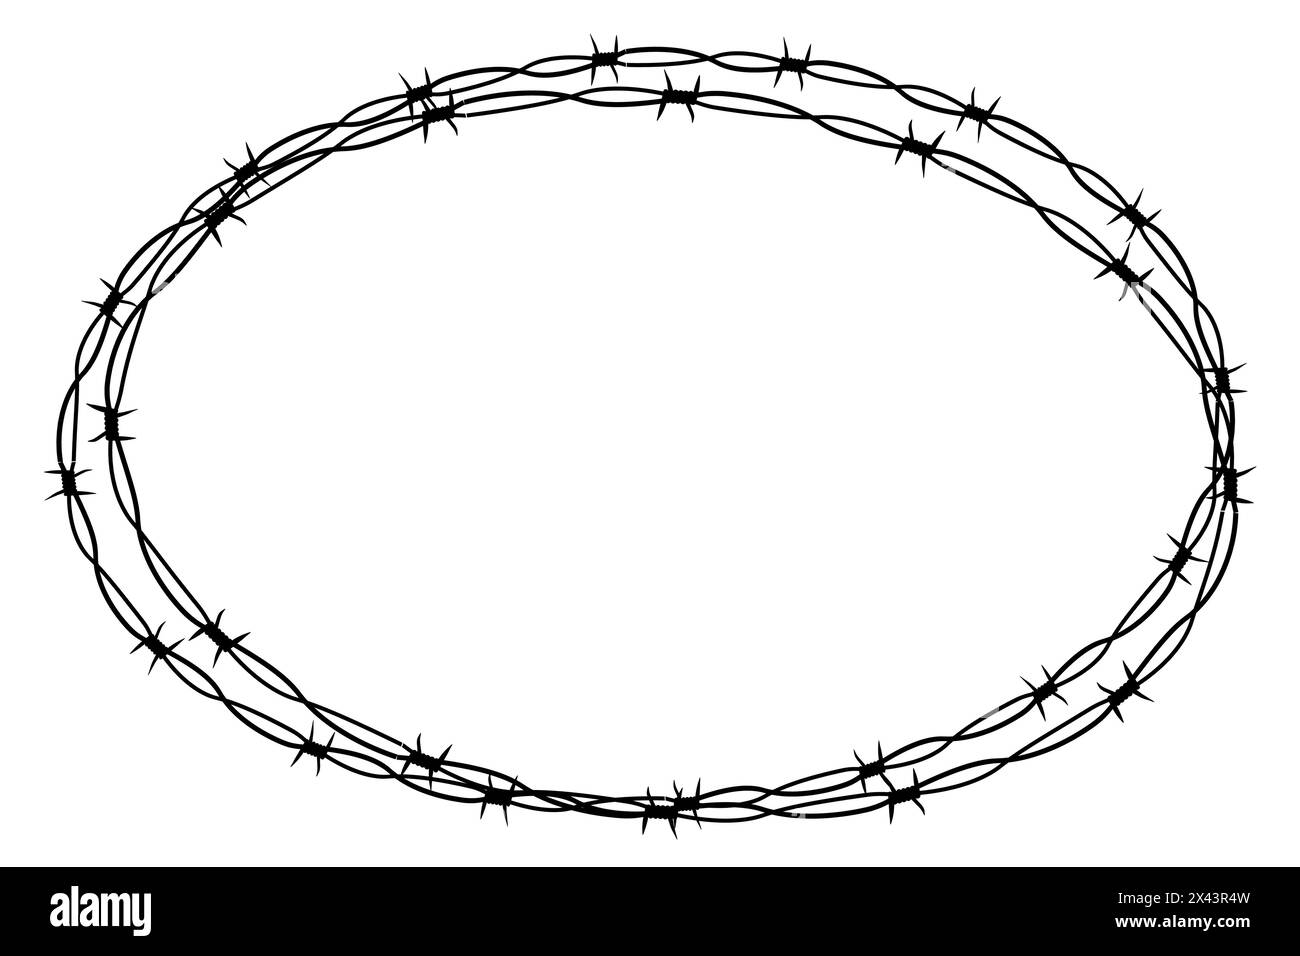 Barbed wire twisted ring y2k, round border tattoo, gothic textured steel frame, spiky oval barrier, silhouette isolated on white background. Vector illustration Stock Vector